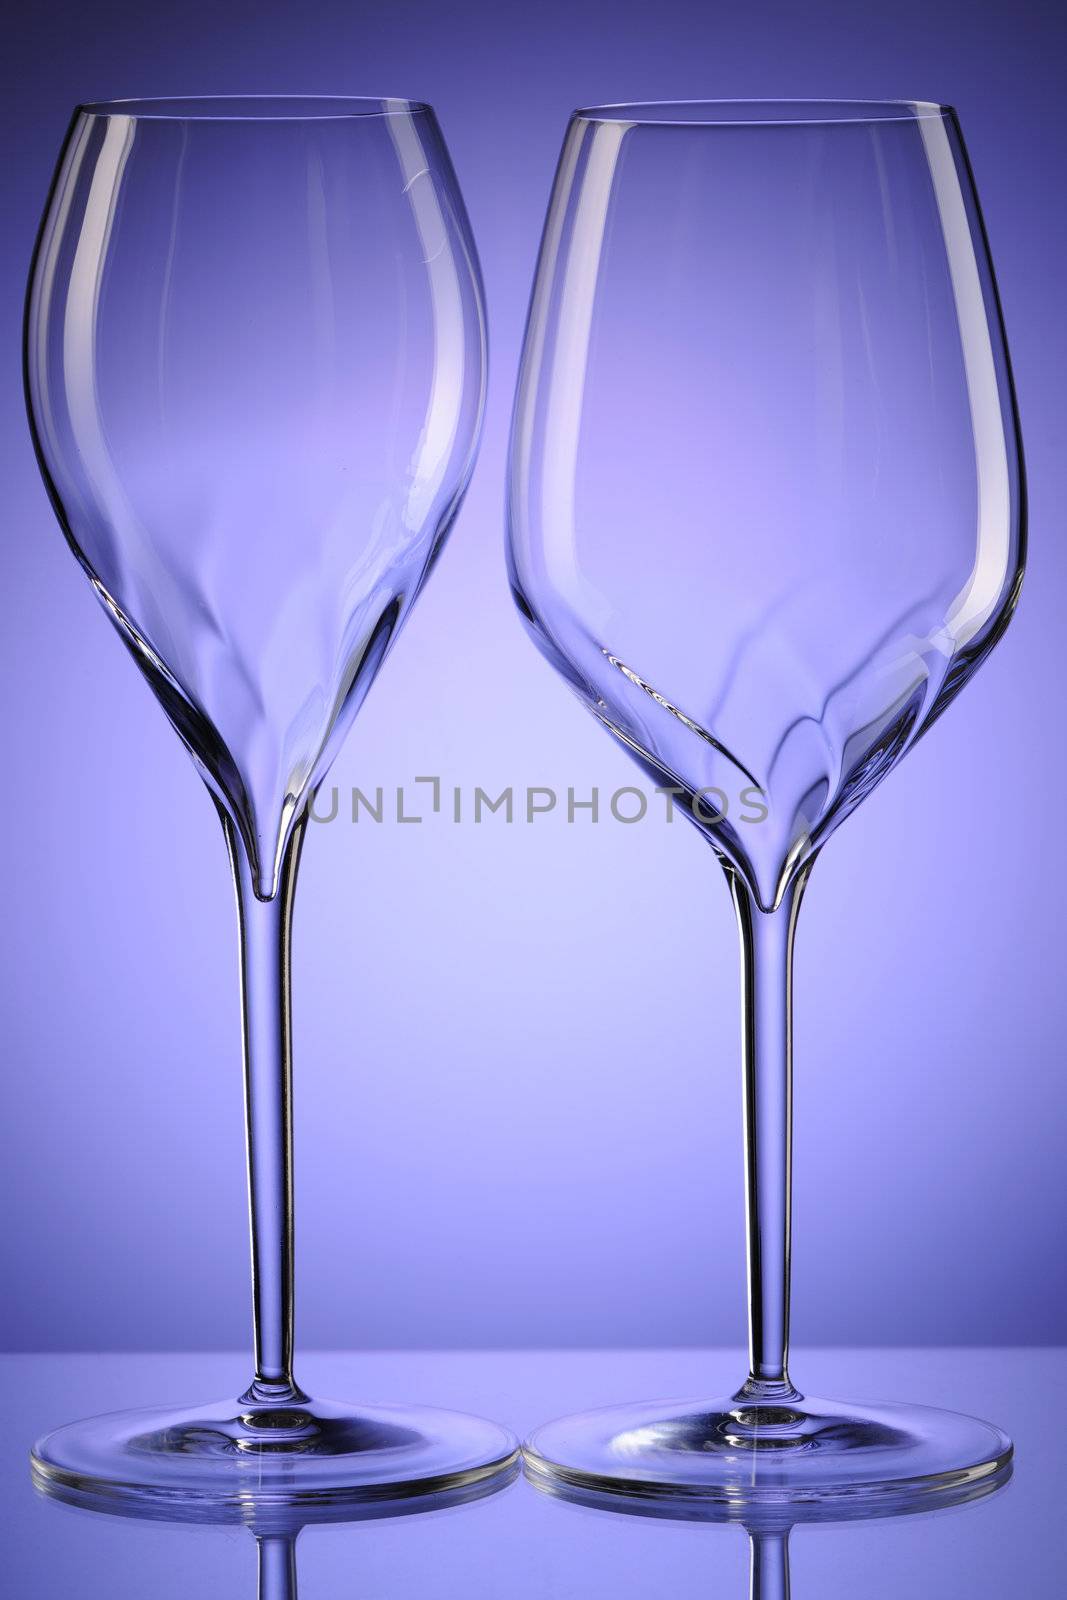 Wine glasses by haveseen